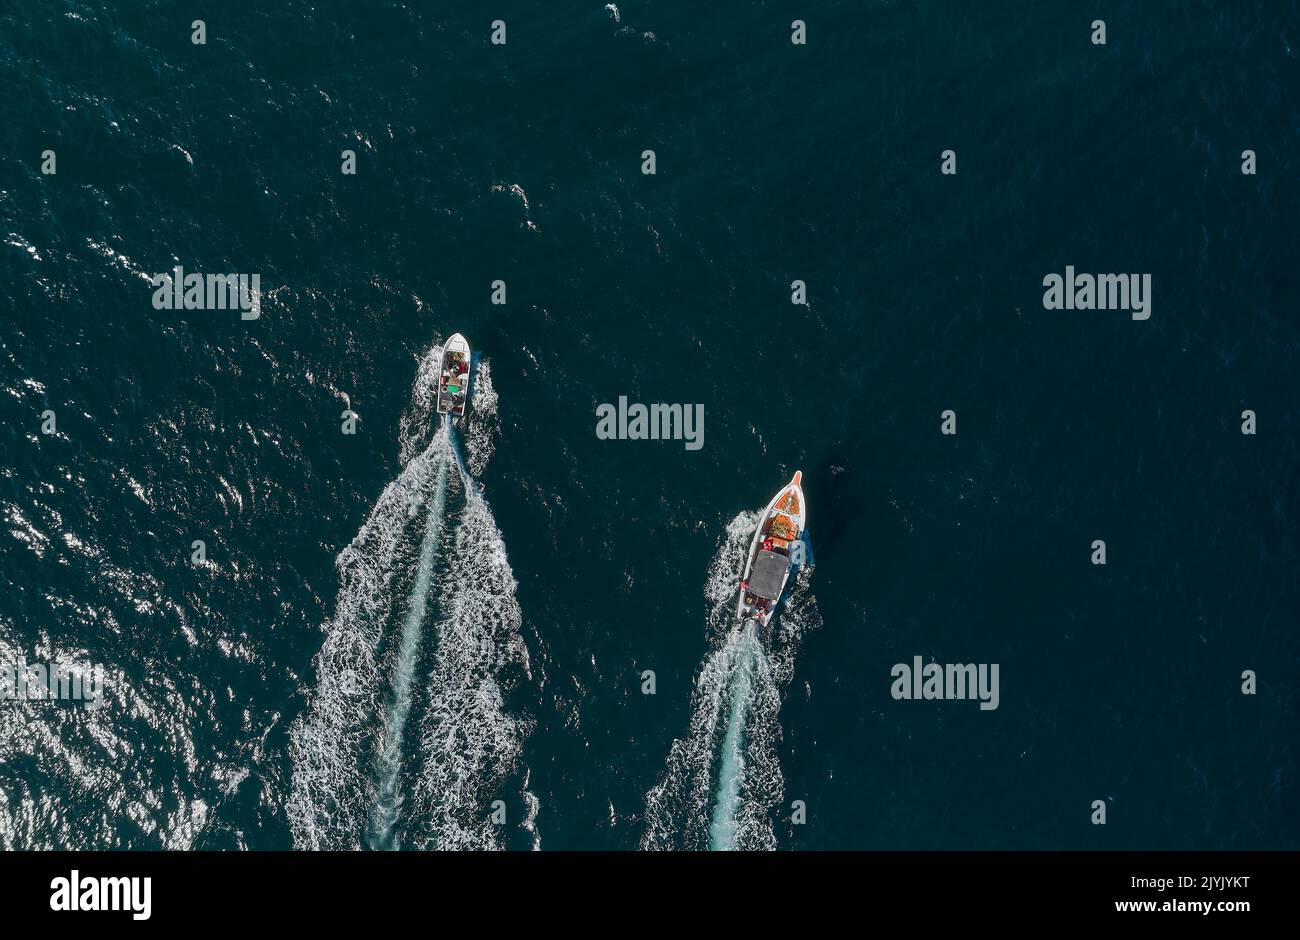 Aerial view of traditional fishing boat in Caraballeda with crystal clear turquoise sea, La Guaira, Venezuela. Stock Photo